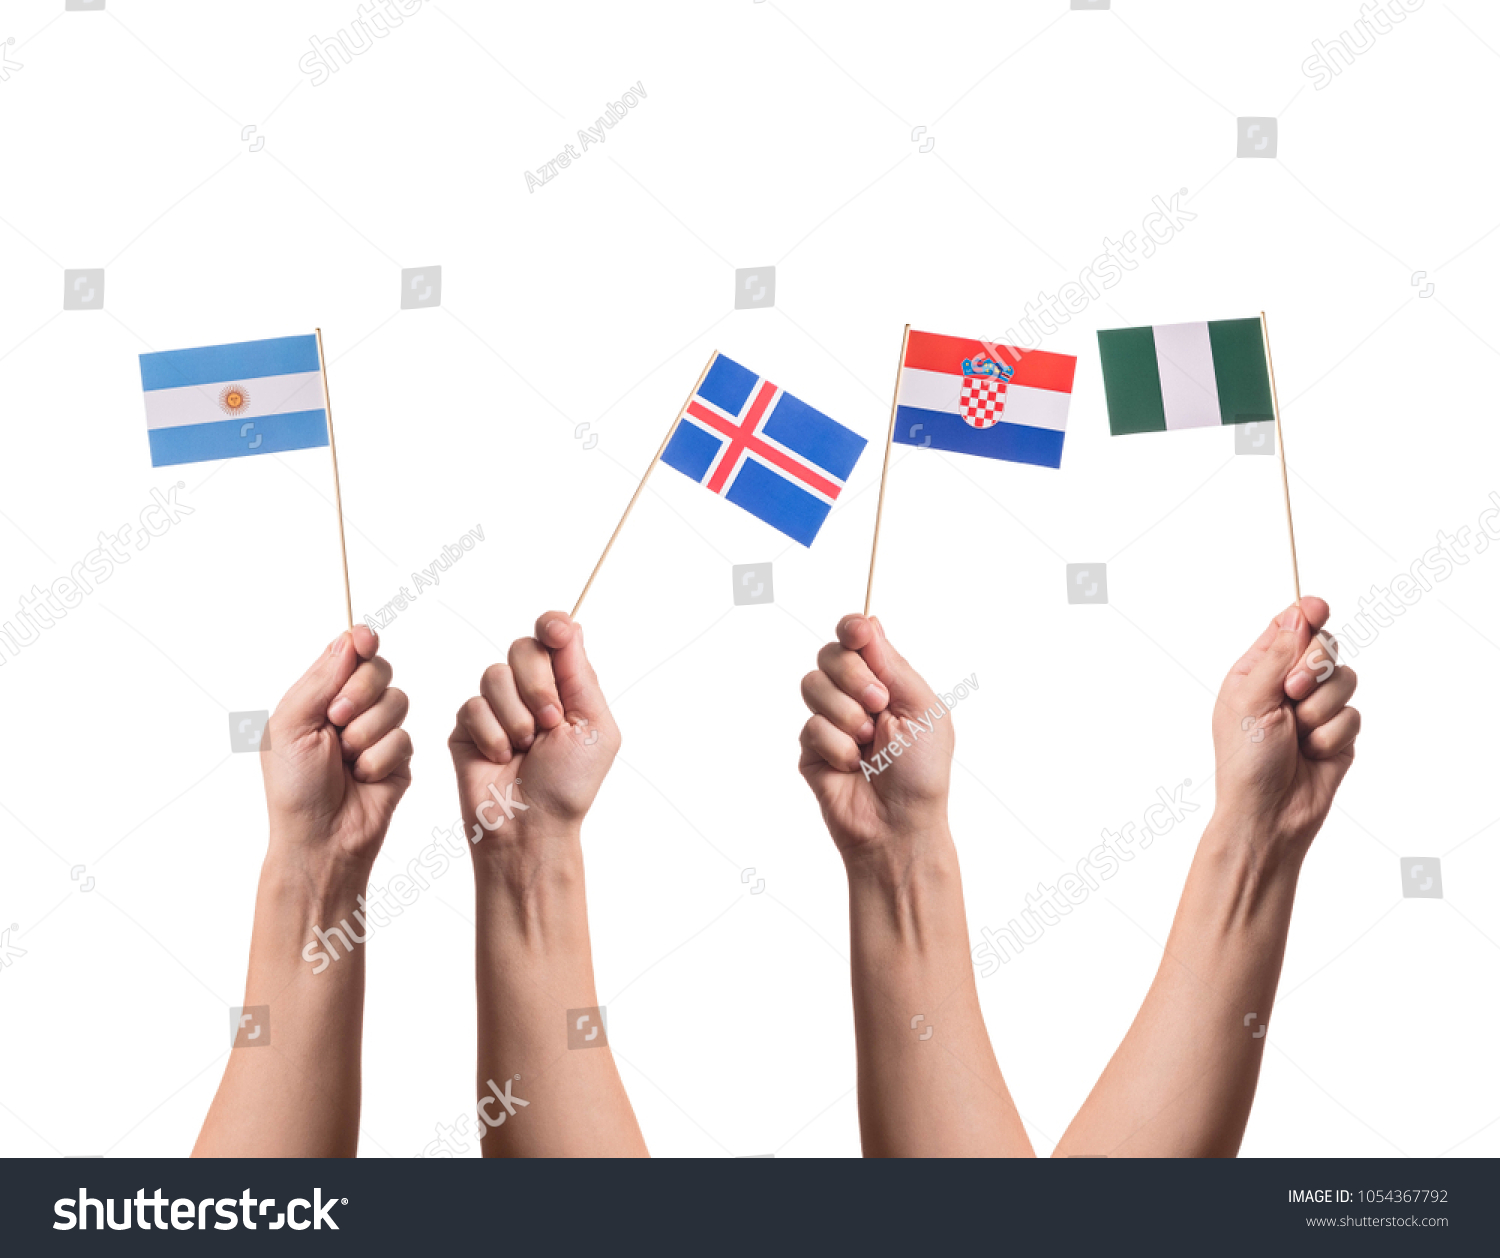 Little paper national flags in hands isolated on white background. Flags of national football teams of Argentina, Iceland, Croatia, Nigeria. World cup competitors in group D #1054367792